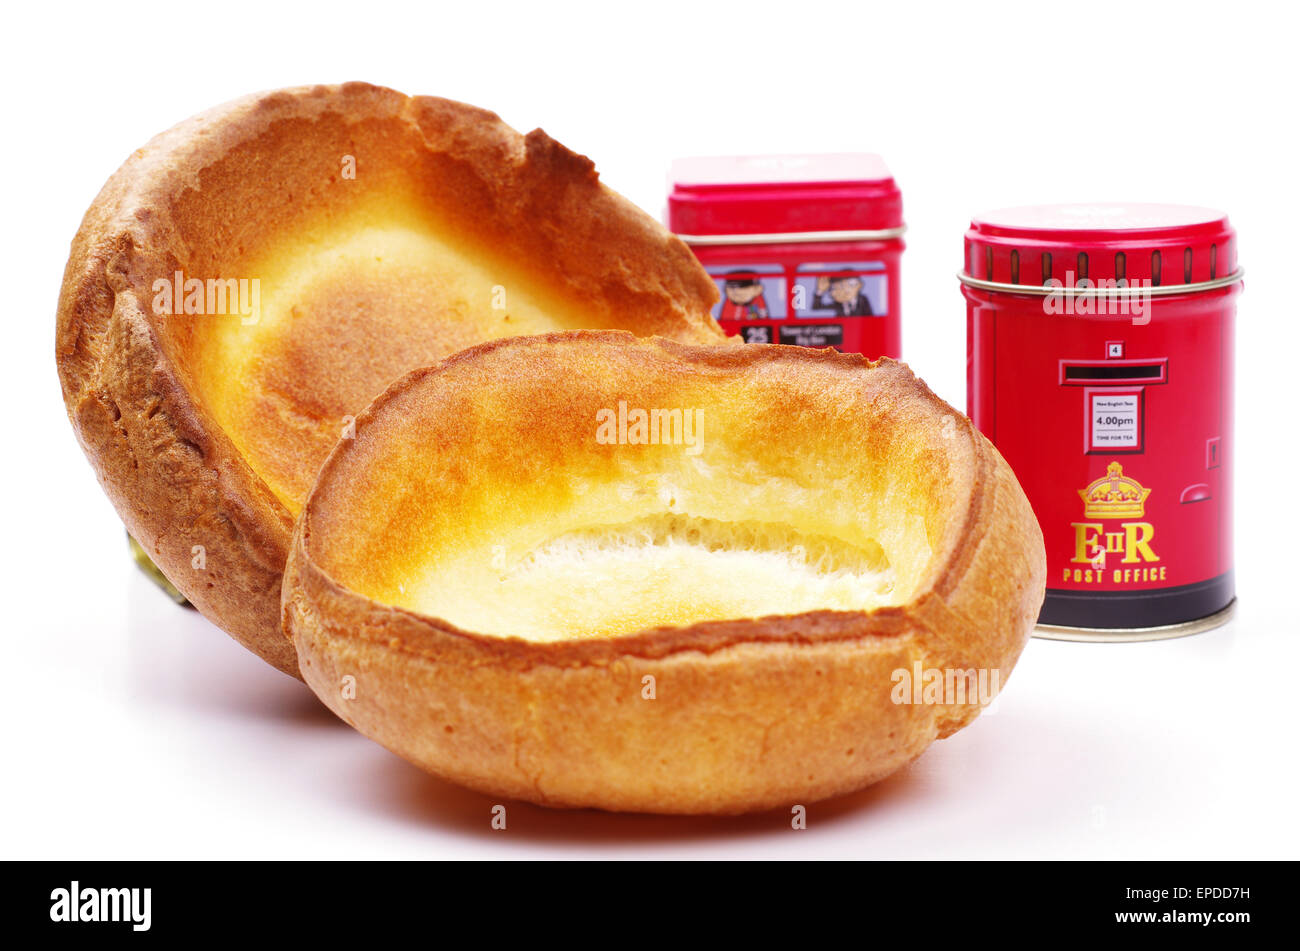 yorkshire puddings golden and fluffy on a white background Stock Photo